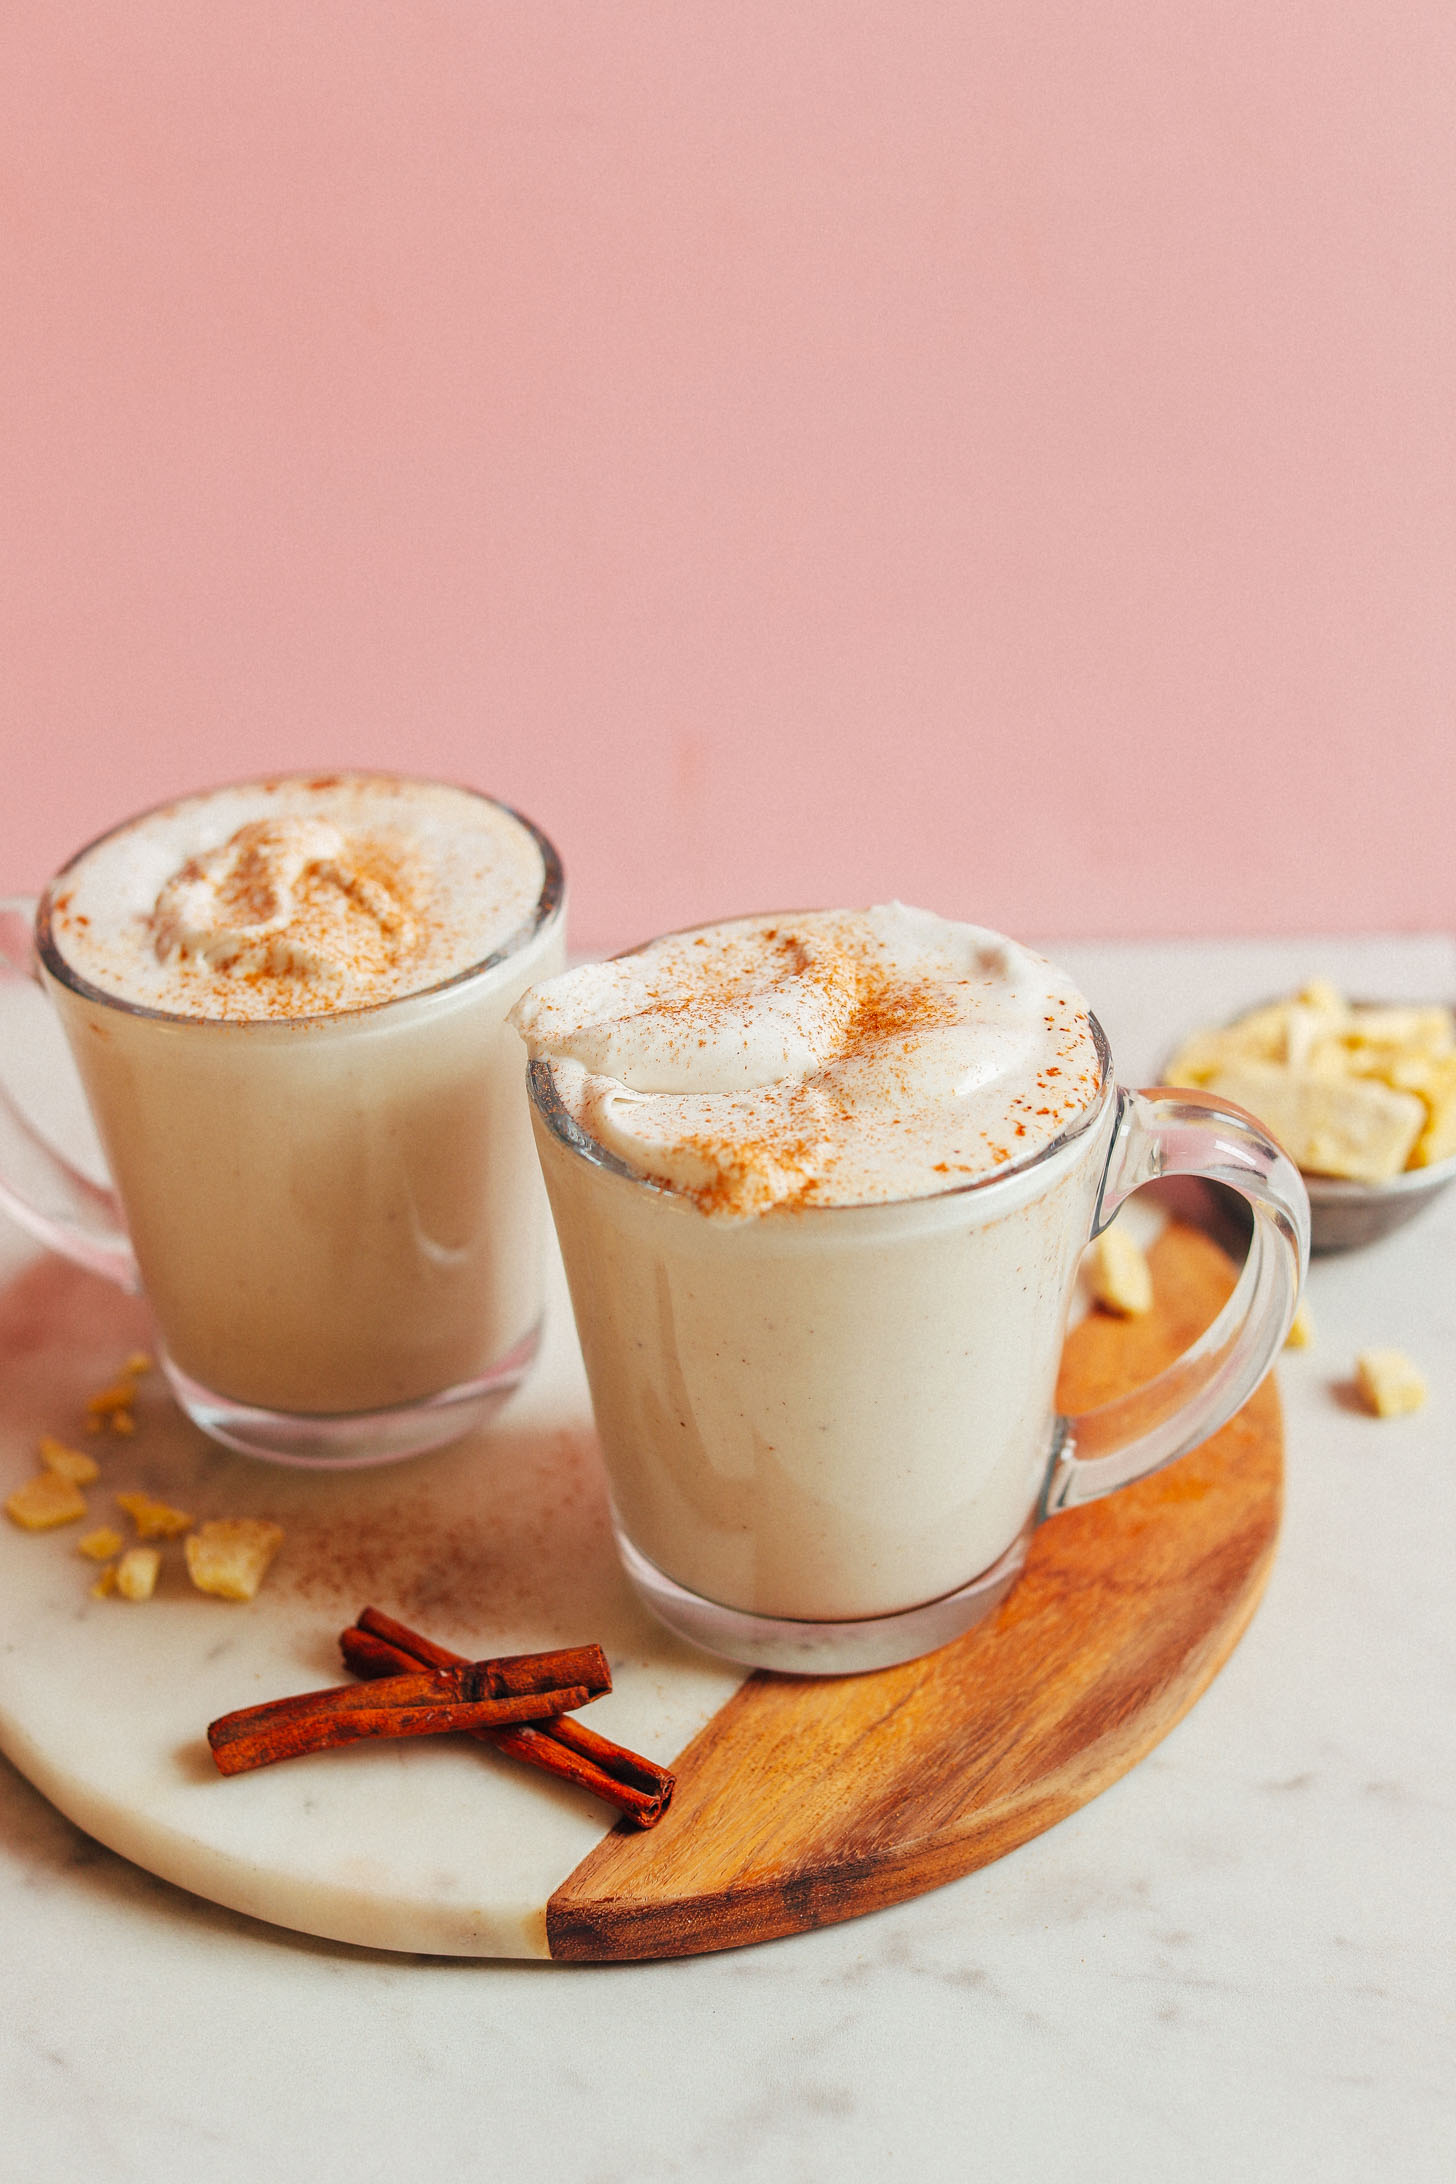 Two mugs of our vegan White Hot Chocolate recipe topped with coconut milk whipped cream